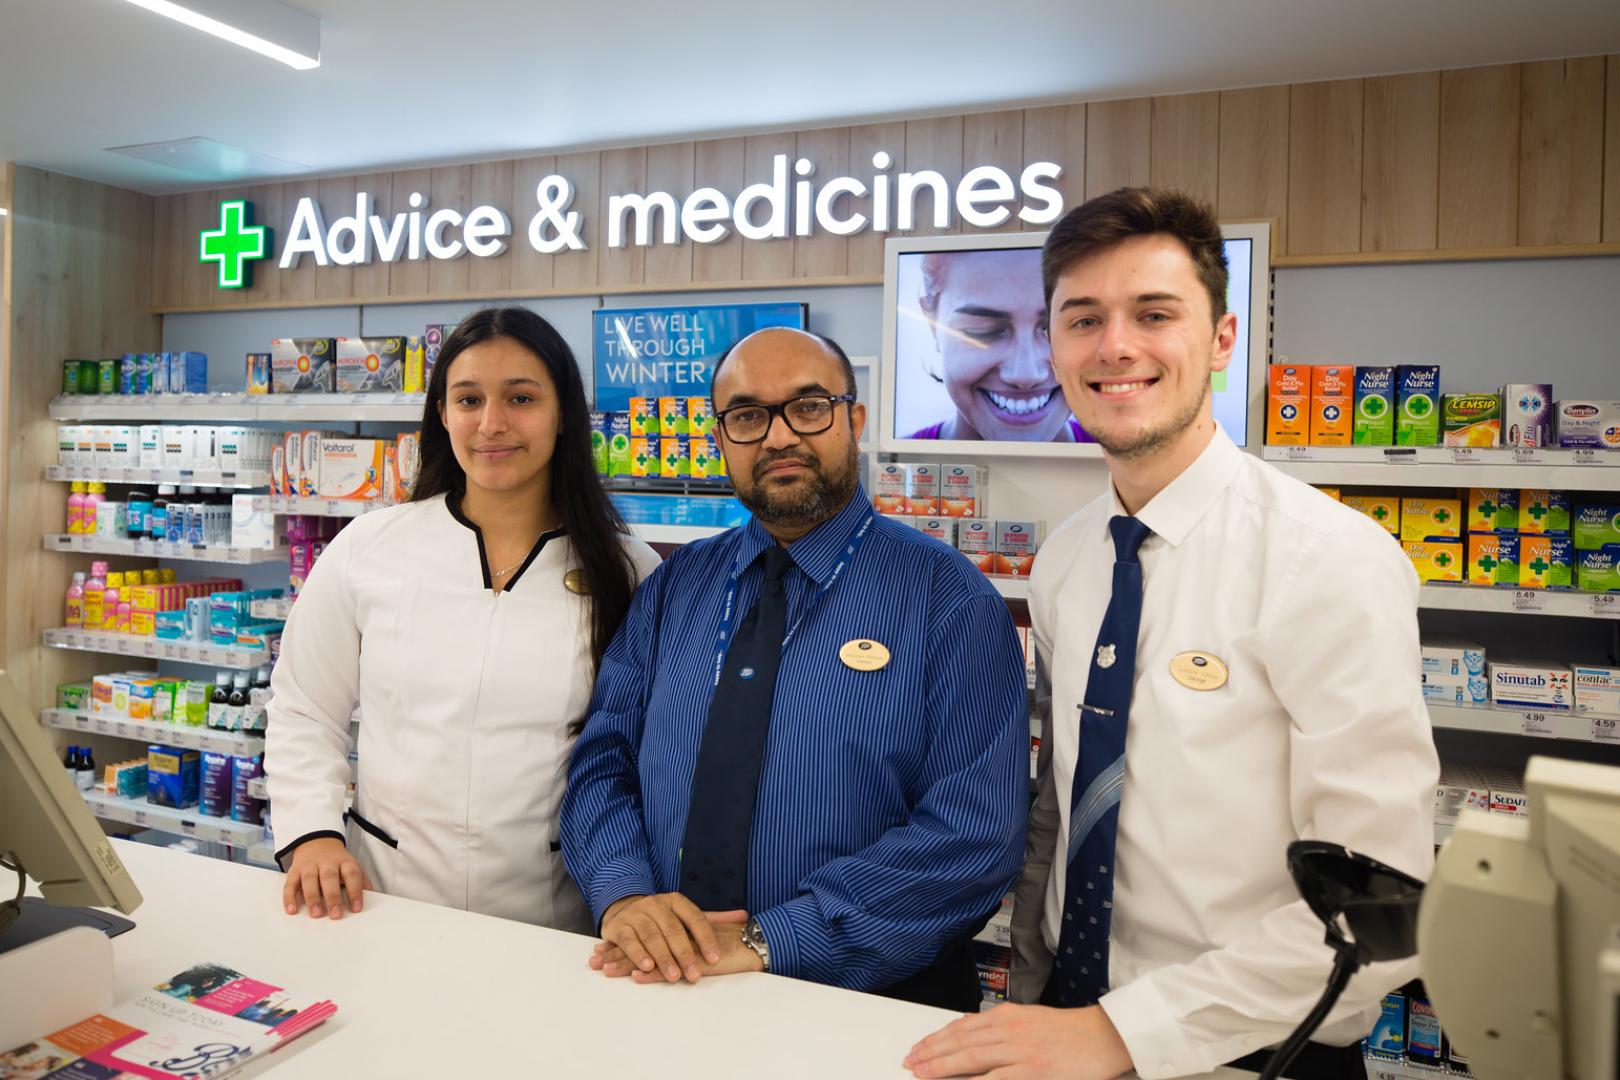 Three colleagues from Boots in the UK standing behind the in store pharmacy counter